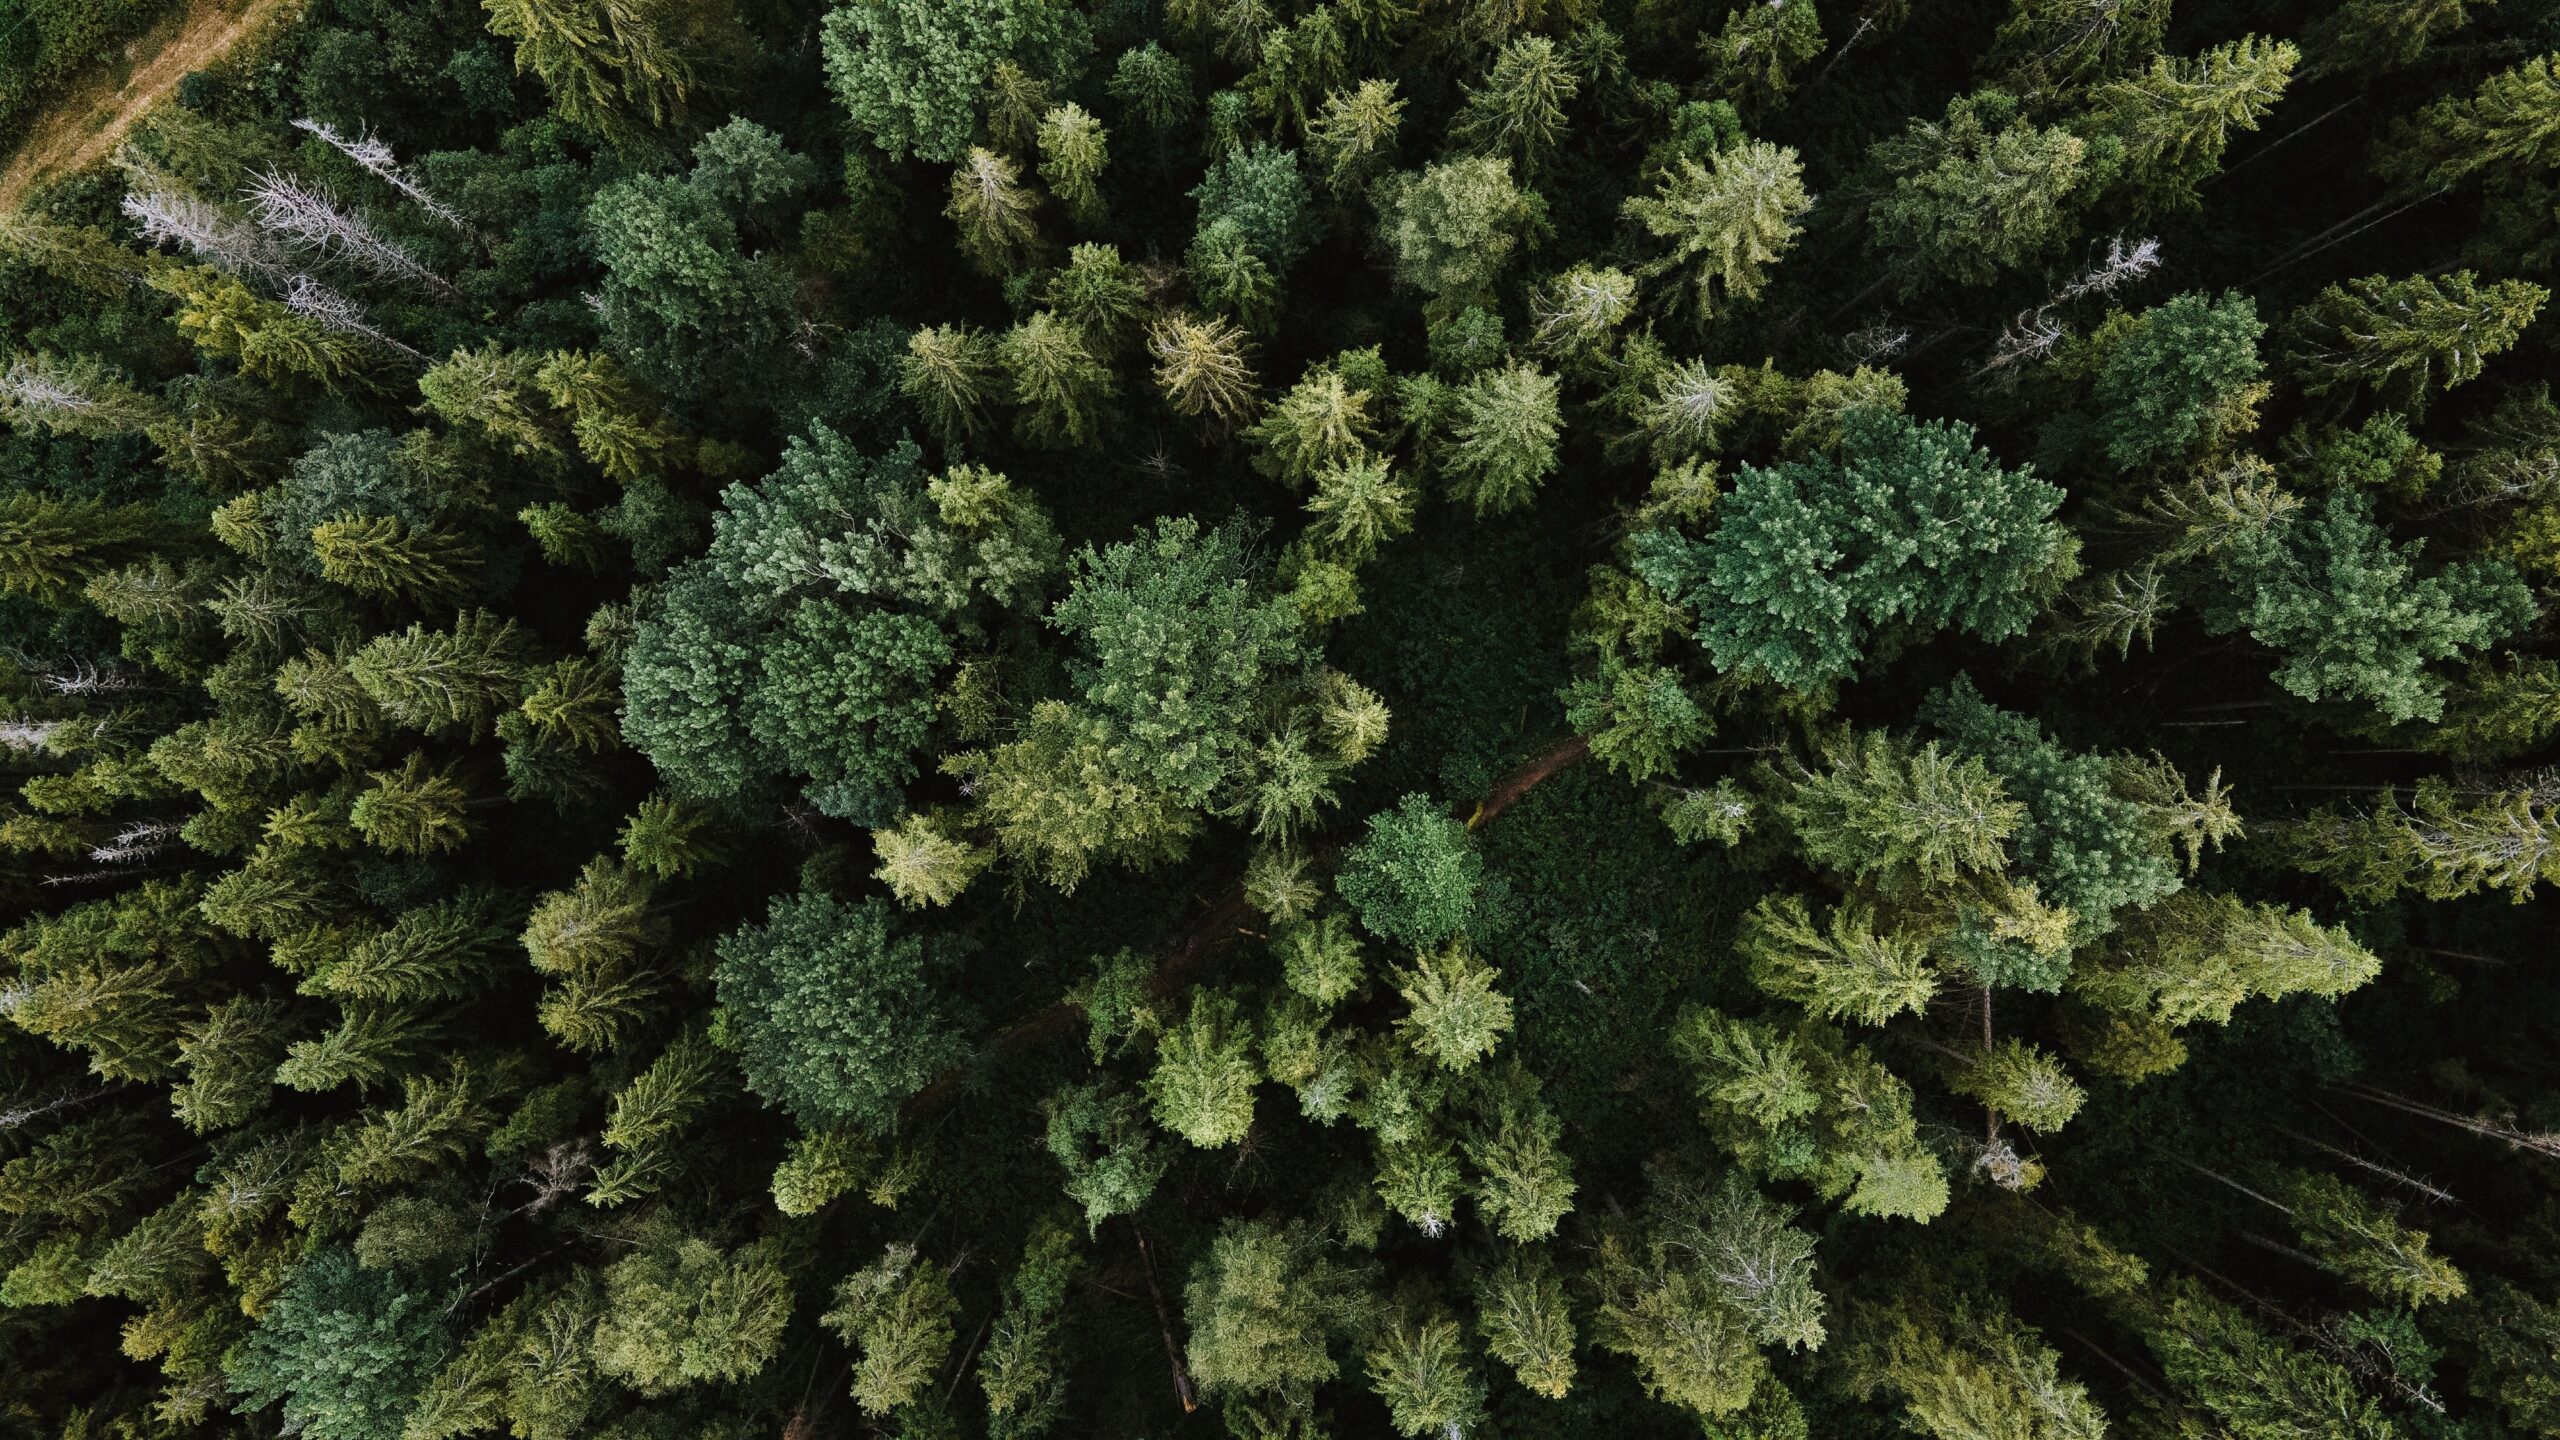 A birds-eye view of a forest